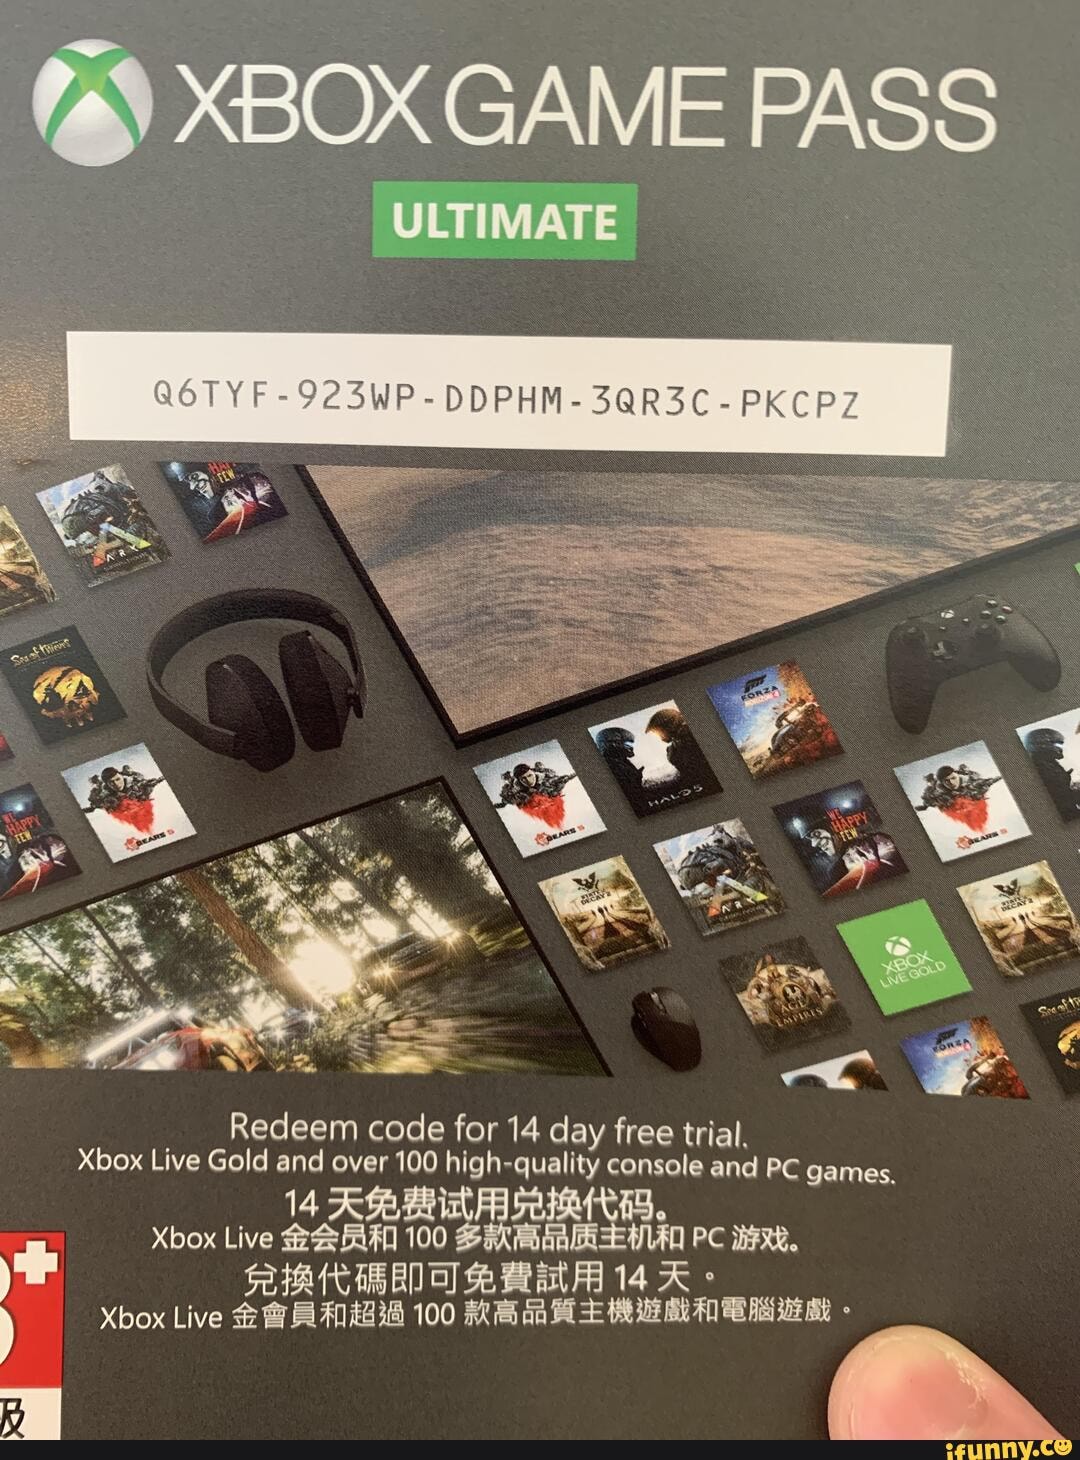 redeem xbox game pass trial code